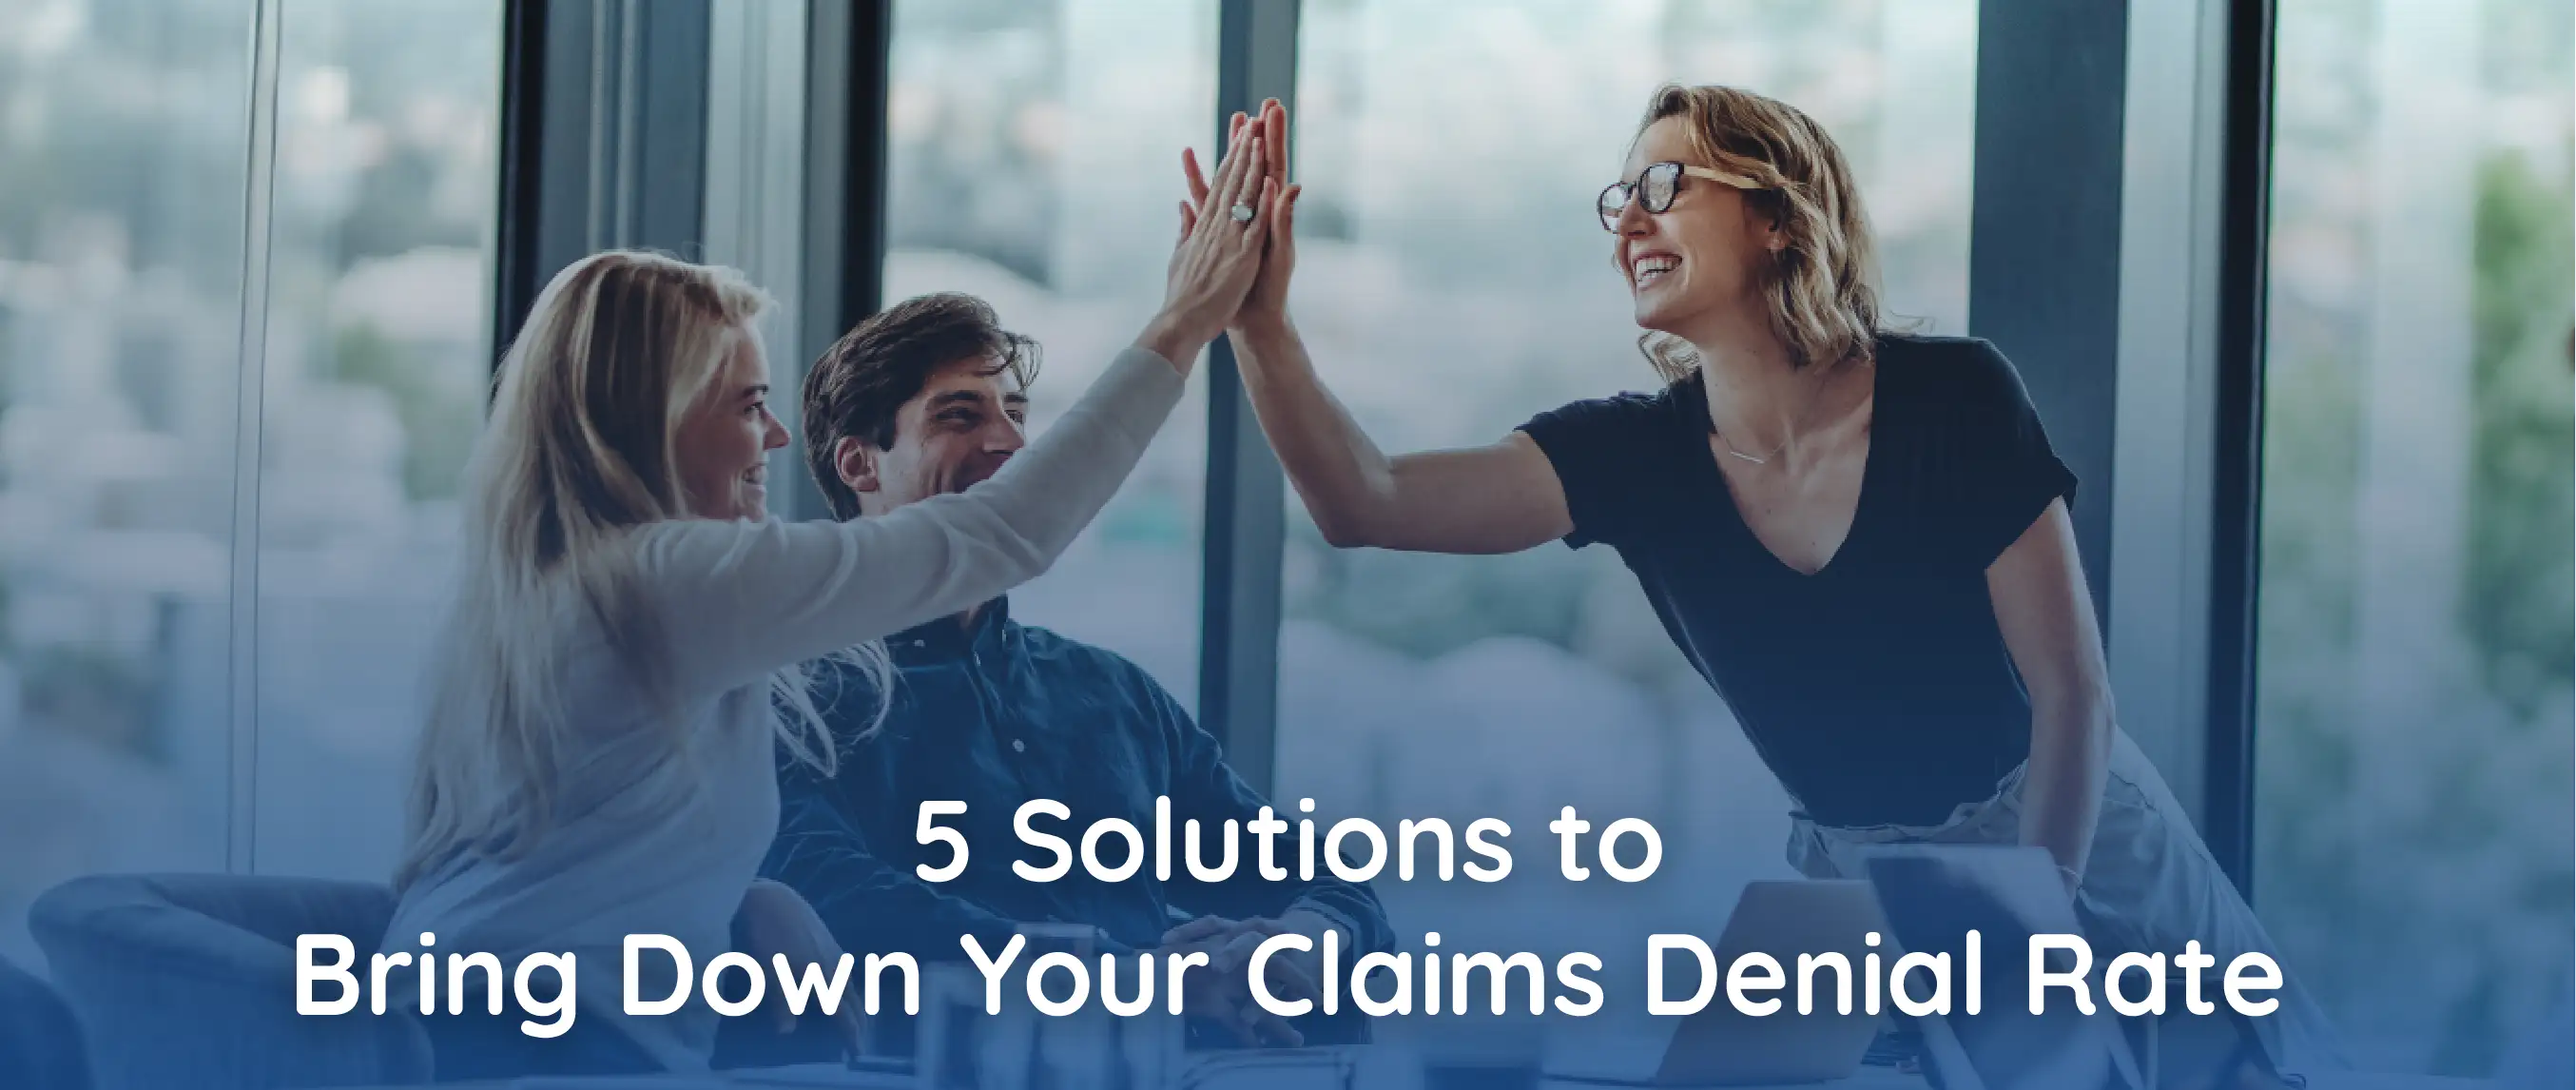 5 Solutions To Bring Down Your Claims Denial Rate